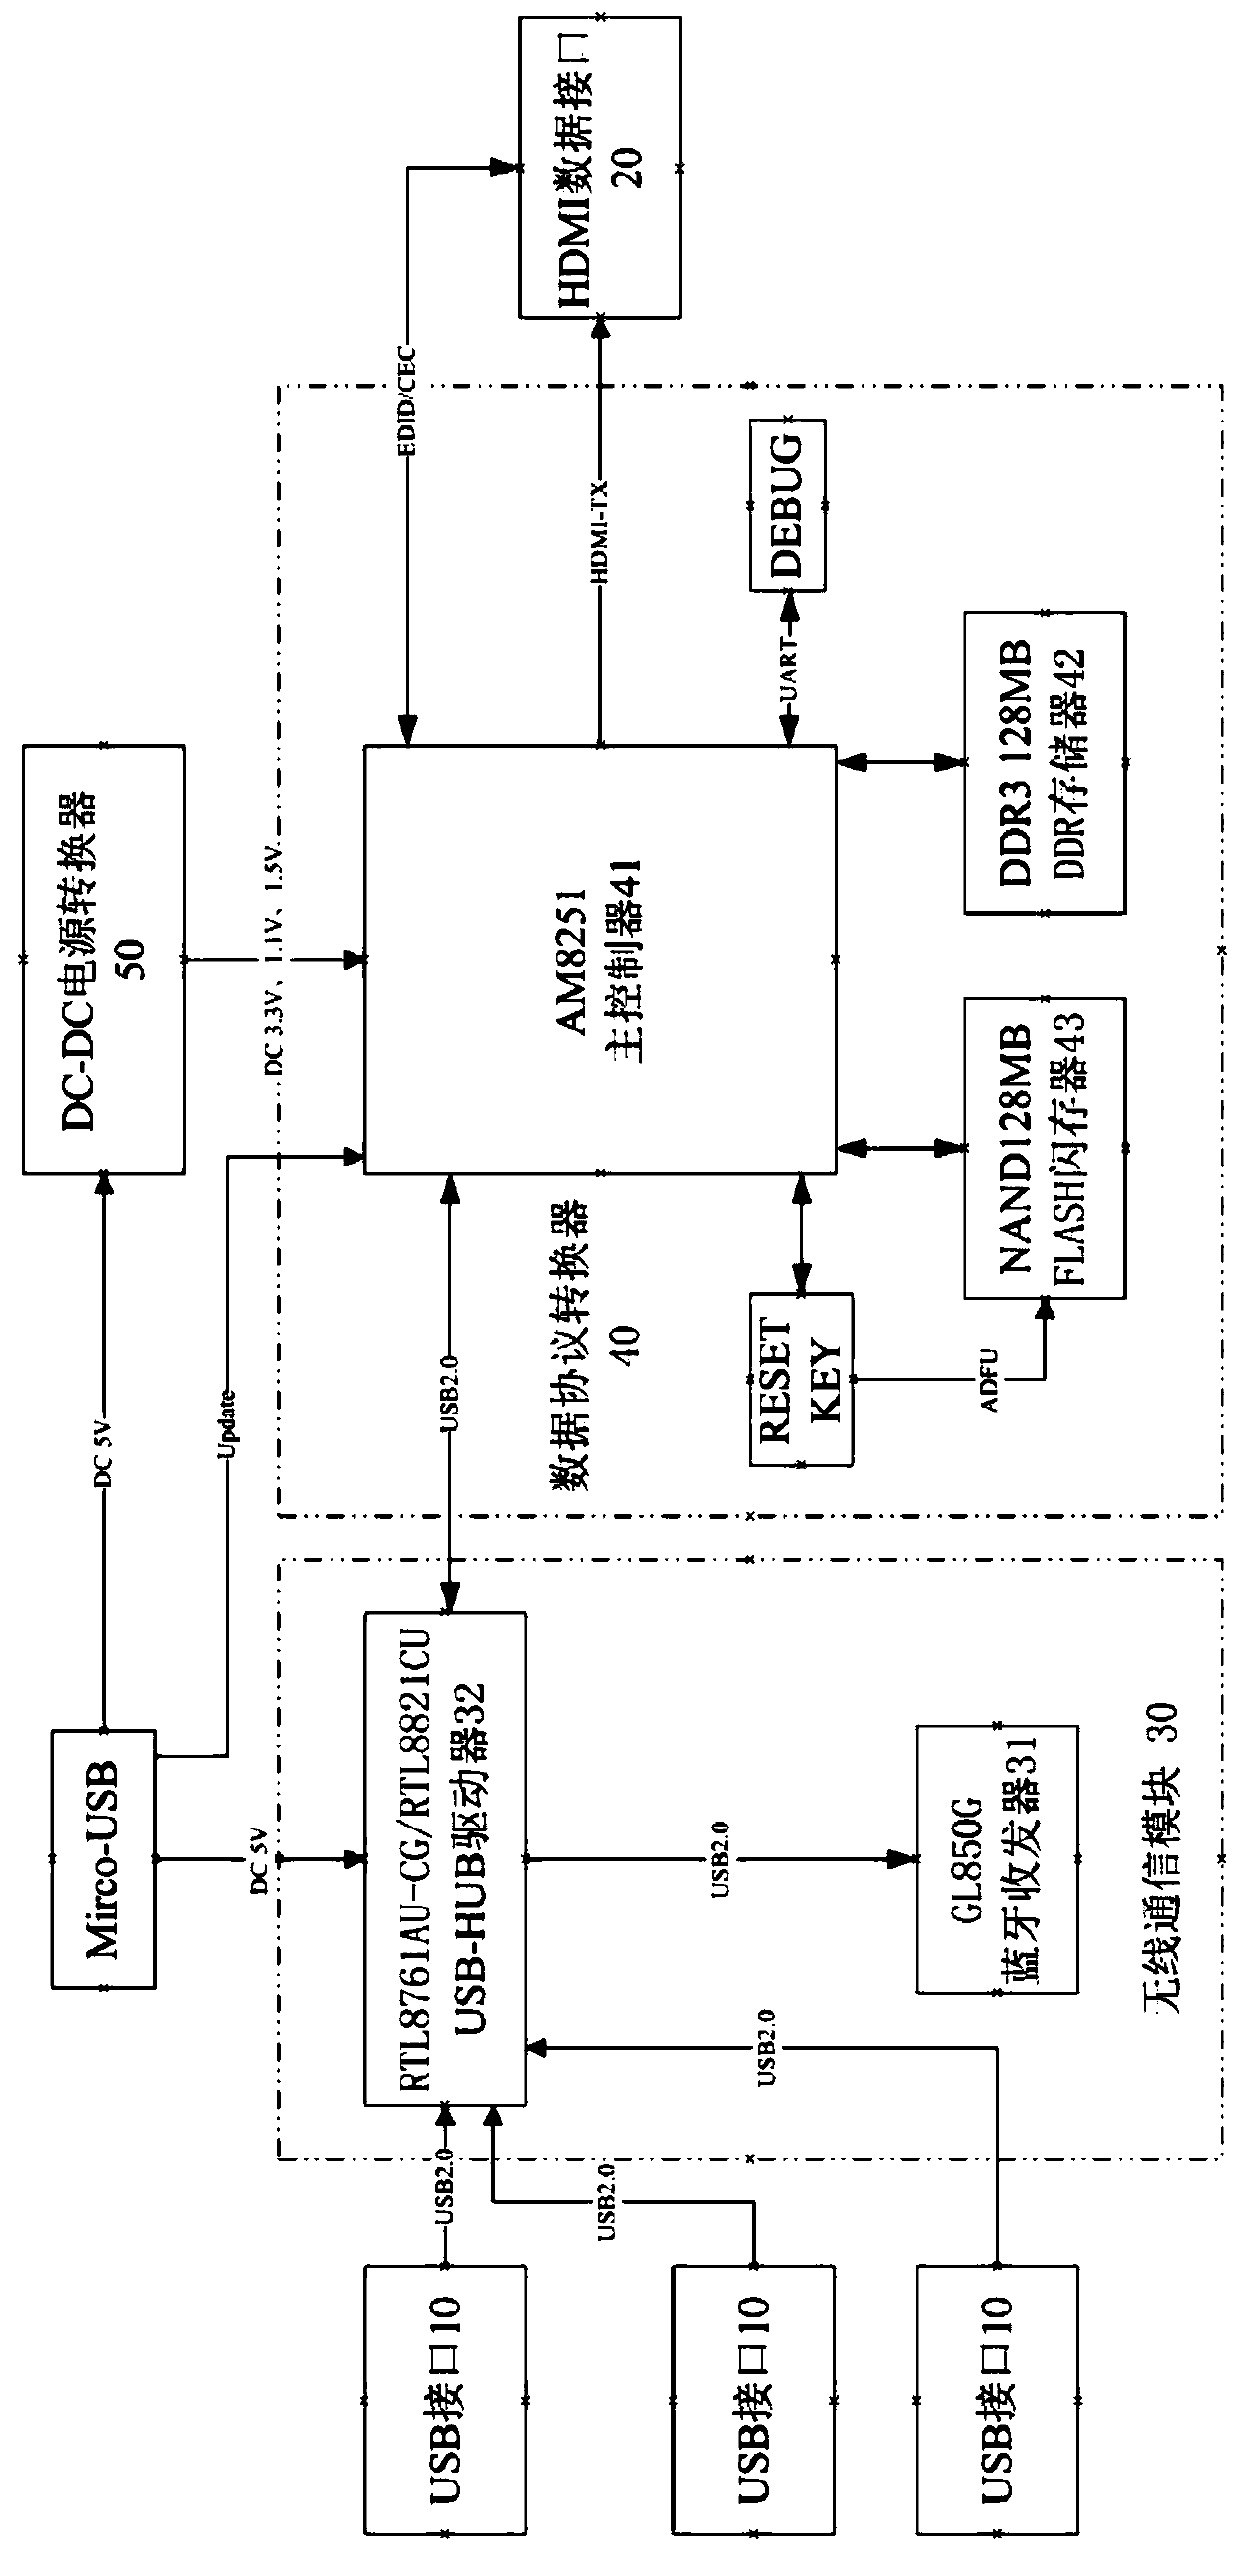 Same-screen control method for feedback controllable terminal operating system